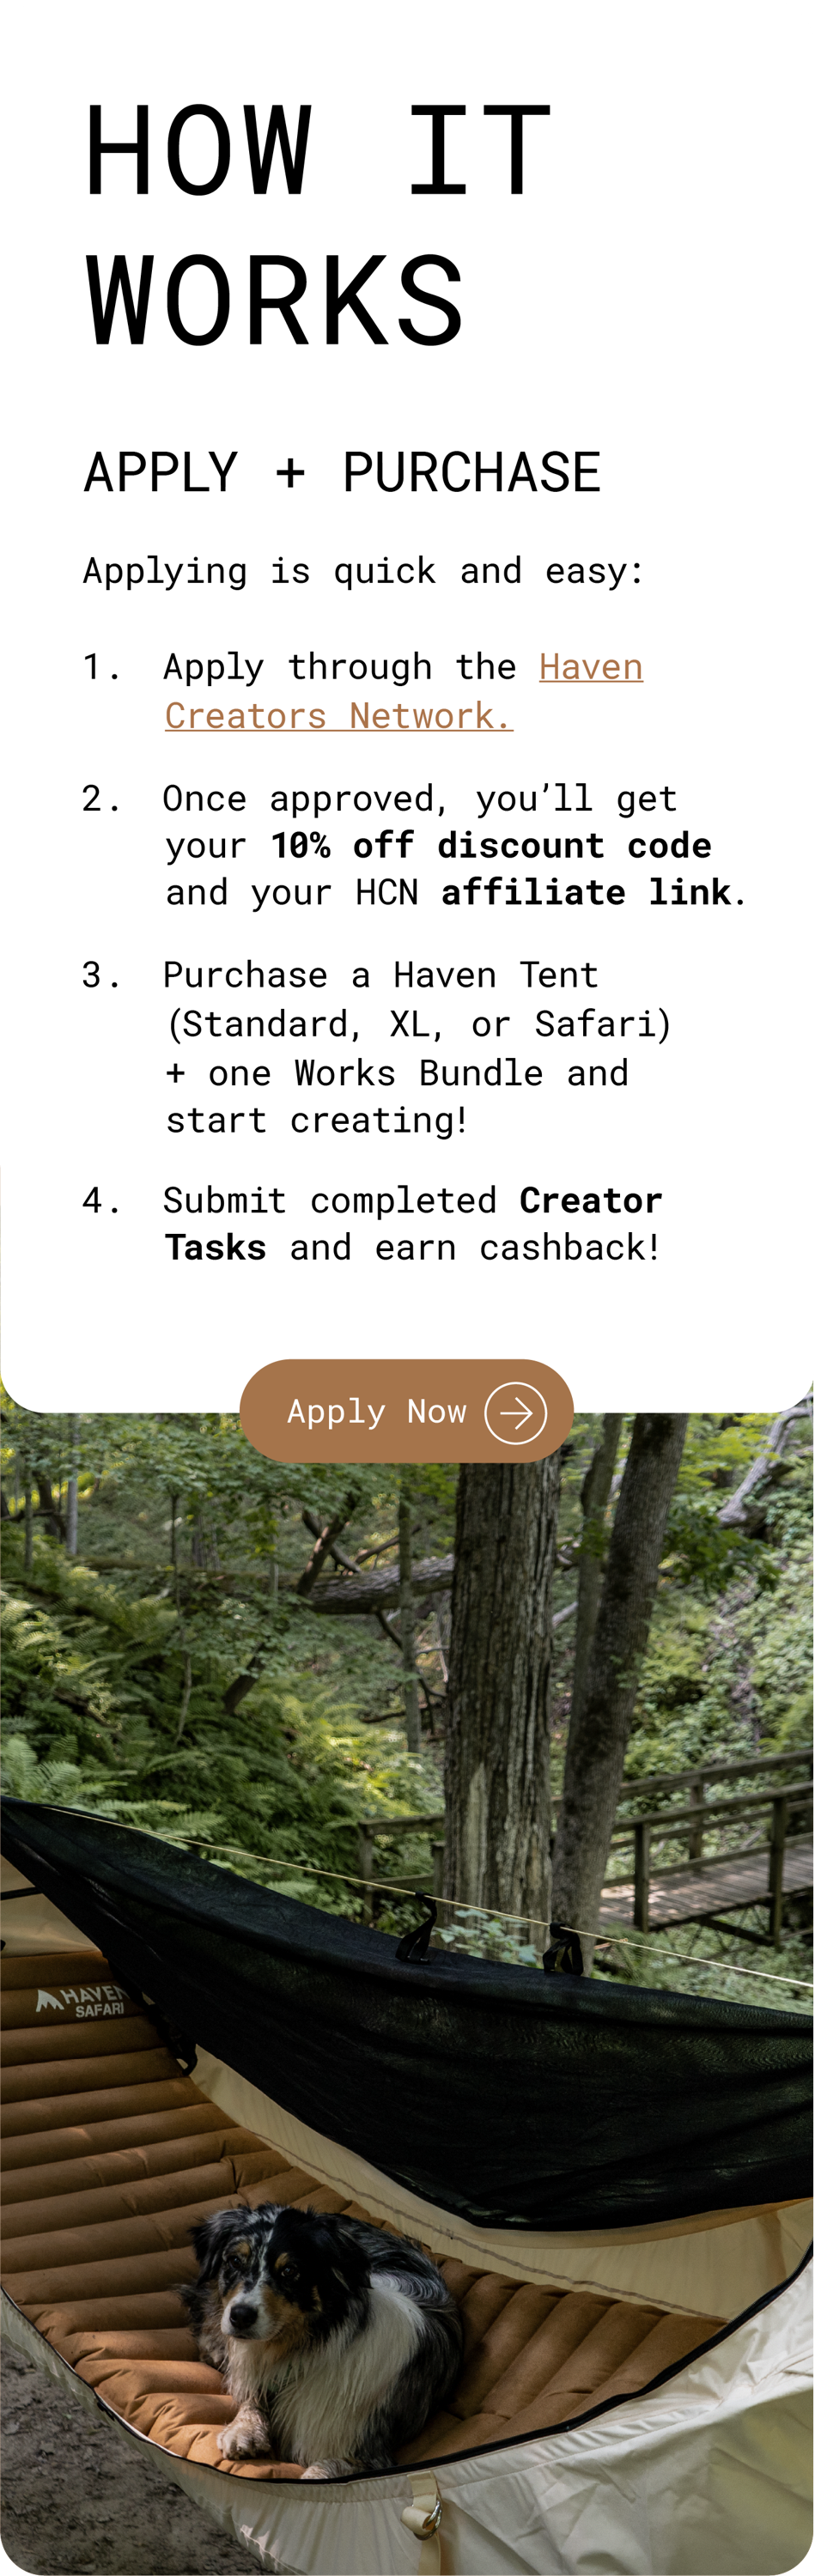 How It Works: Apply + Purchase. Applying is quick and easy: Apply through the Haven Creators Network. Once approved, you'll get your 10% off discount code and your HCN affiliate link. Purchase a Haven Tent (Standard, XL, or Safari) + one Works Bundle and start creating! Submit completed Creator Tasks and earn cashback! Apply Now